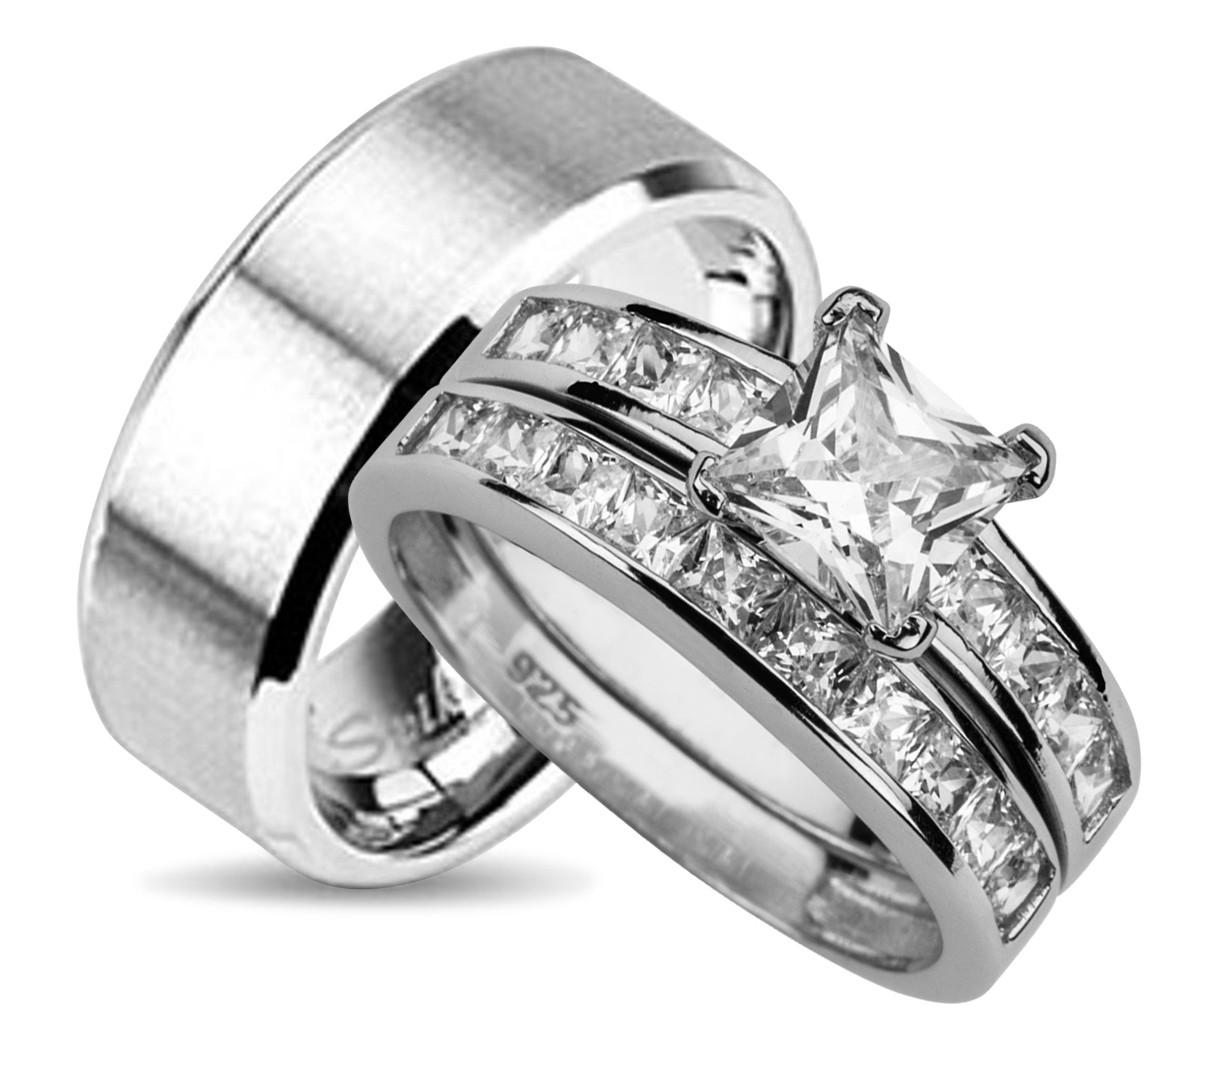 Cheap Wedding Bands For Him And Her
 View Full Gallery of Beautiful Cheap Wedding Sets His and